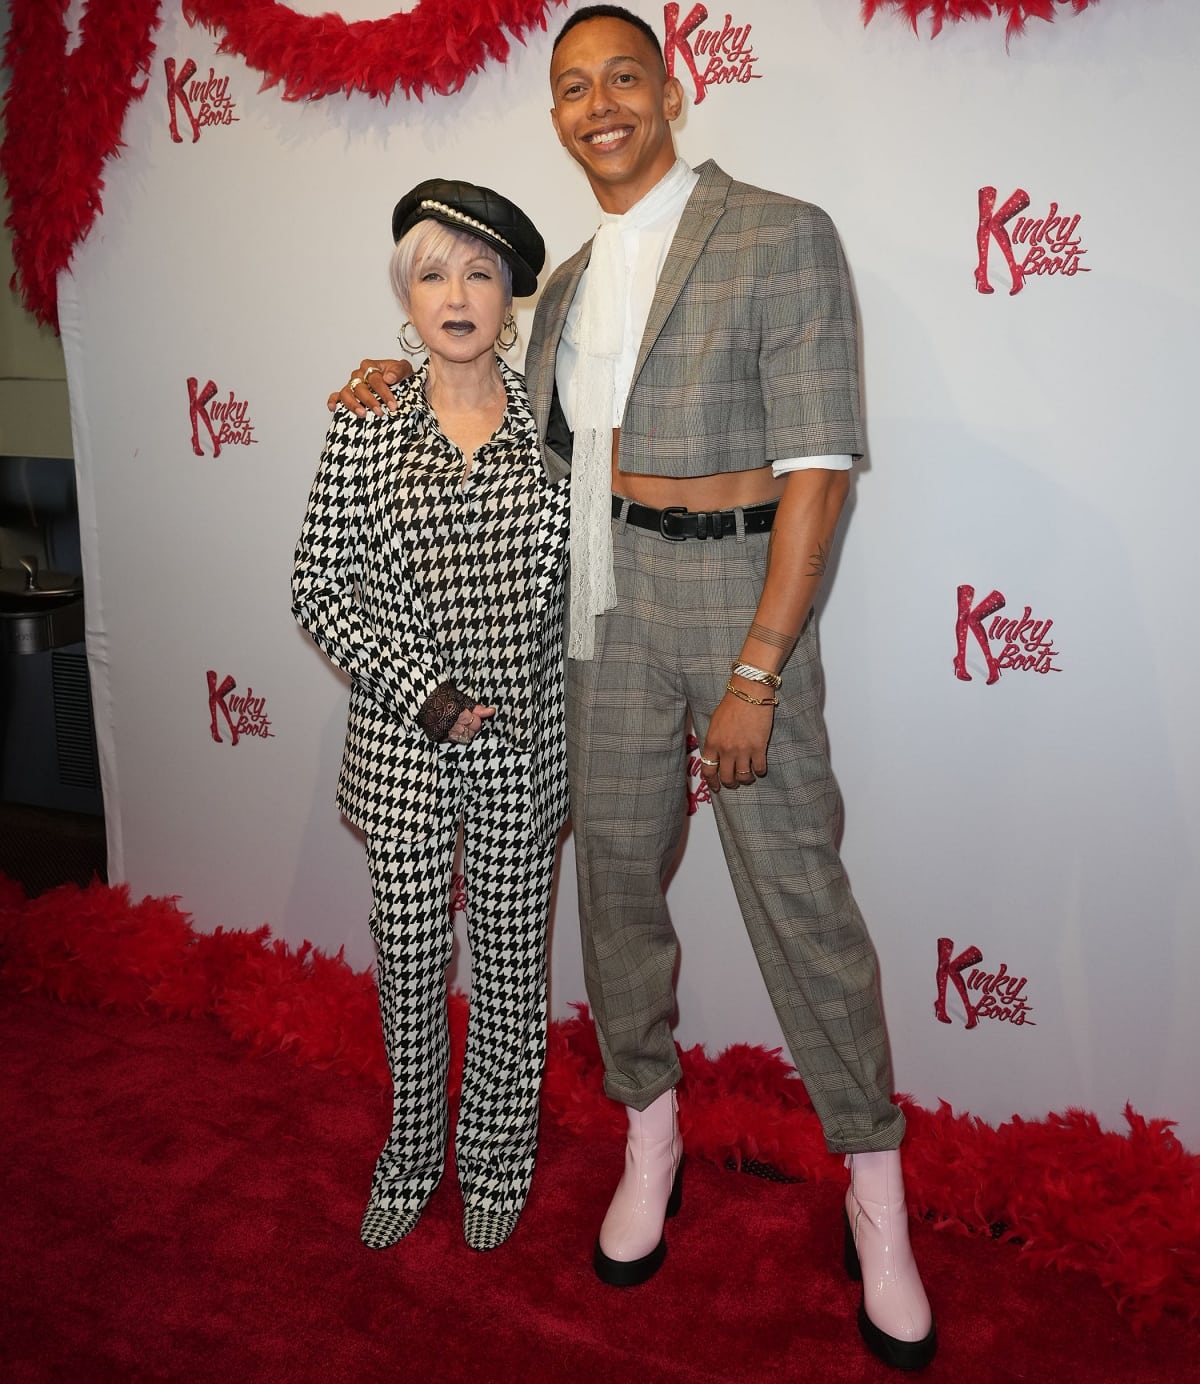 At five feet and three inches, Cyndi Lauper is shorter than Callum Francis who stands at slightly over six feet tall